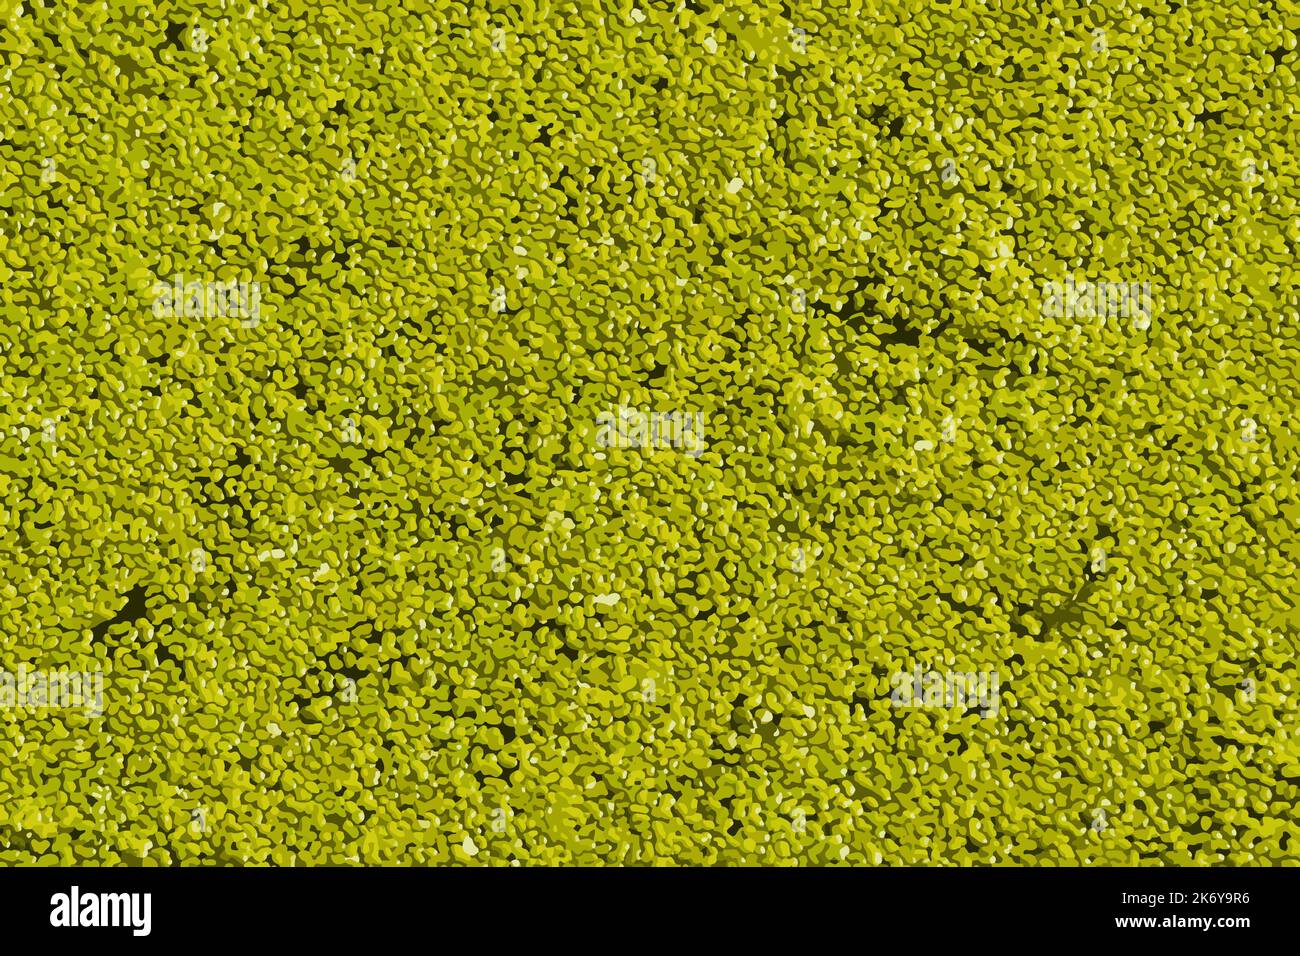 Realistic vector illustration of a background with abstract pattern made of aquatic plant Lemna. Green leaves of duckweeds on sunny day Stock Photo